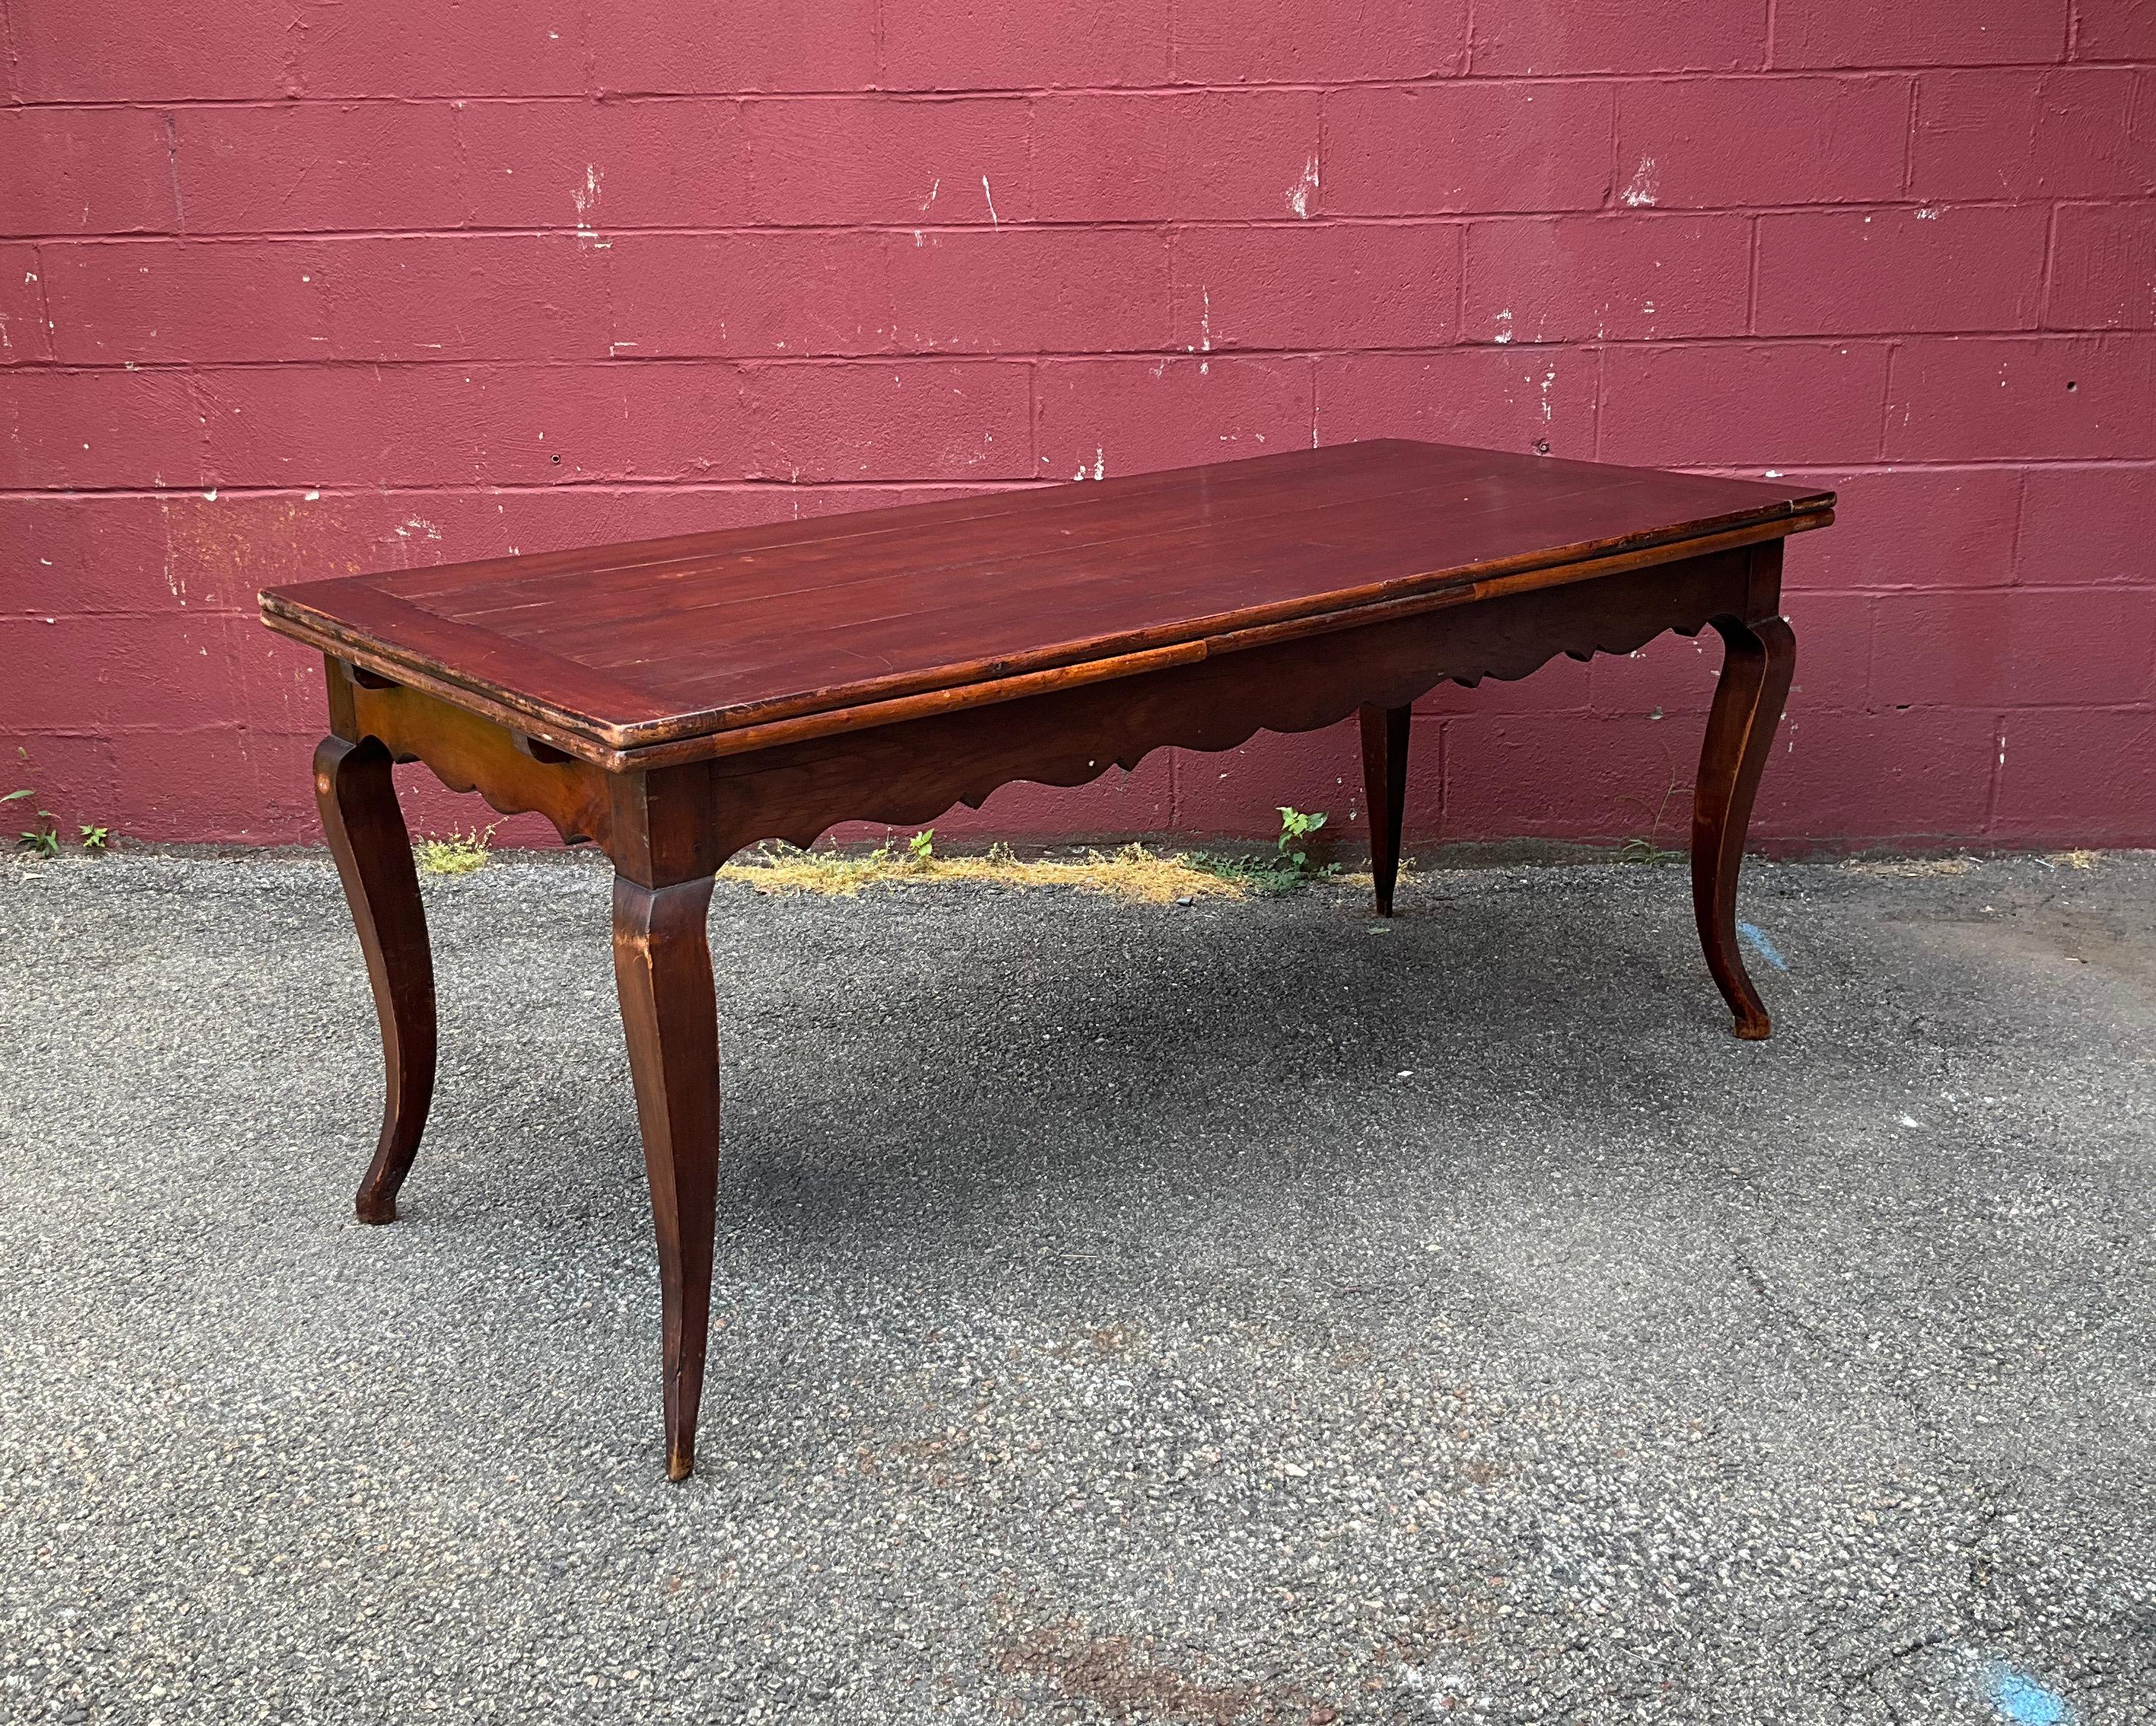 This rustic yet elegant French farm table features two built in leaves, gracefully curved legs and a scalloped apron. When closed, the table is 67¾ inches in length but can extend to 93¼ inches when using the leaves. Hailing from the early 20th